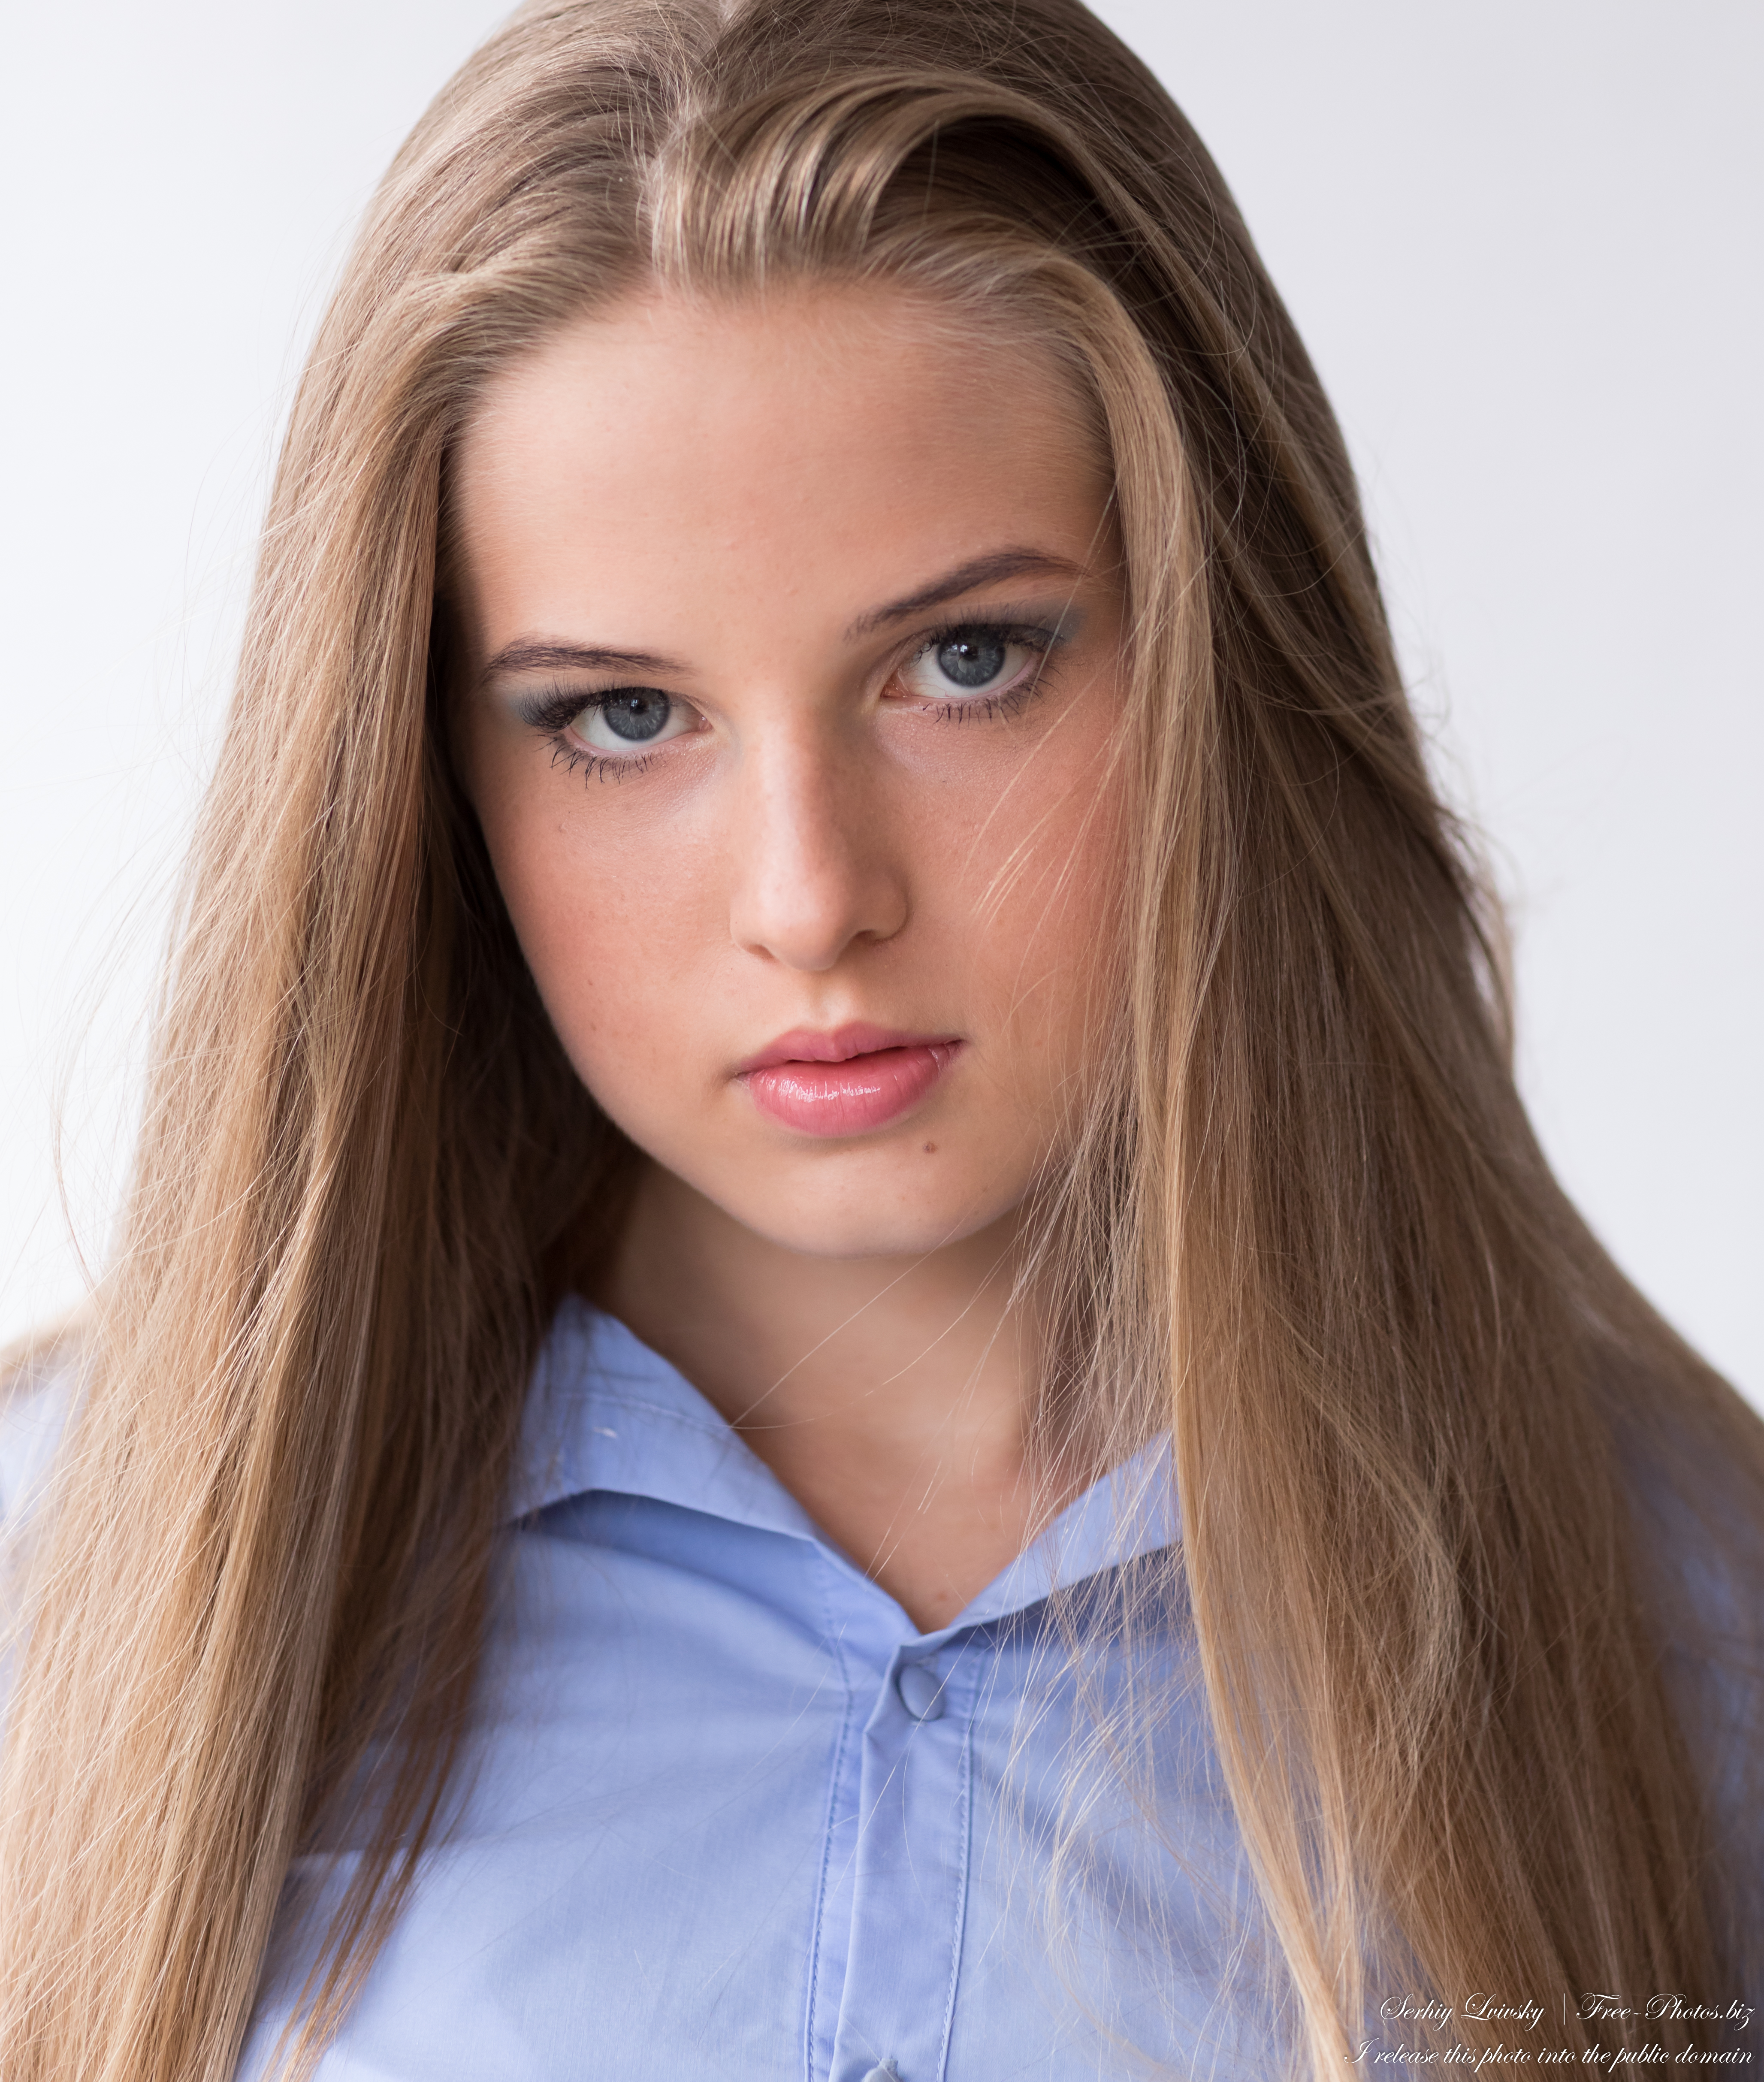 Diana - an 18-year-old natural blonde girl photographed in August 2020 by Serhiy Lvivsky, picture 13